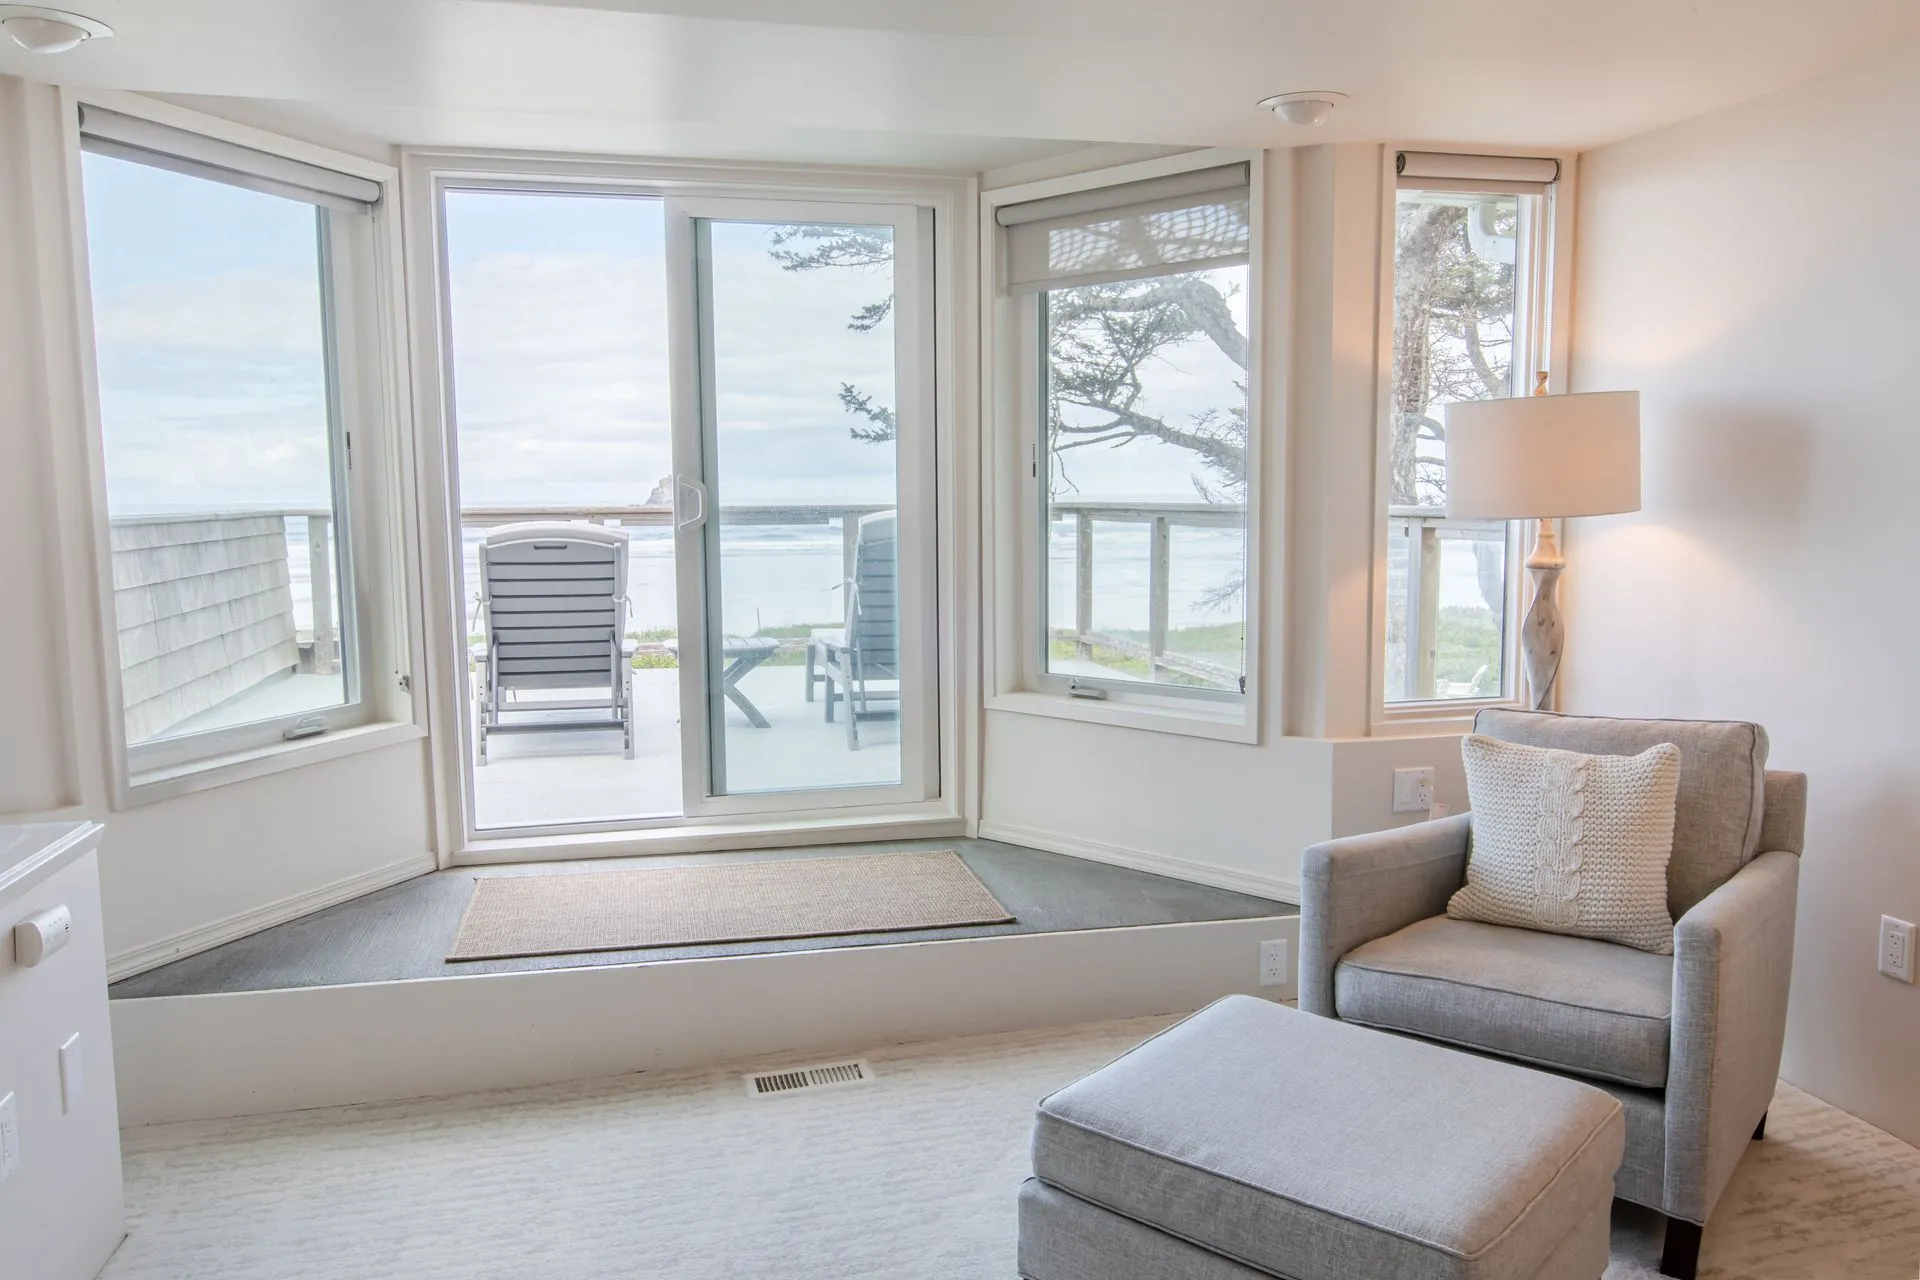 Vacation Rental in Cannon Beach, Sona Tra bedroom with view of the ocean